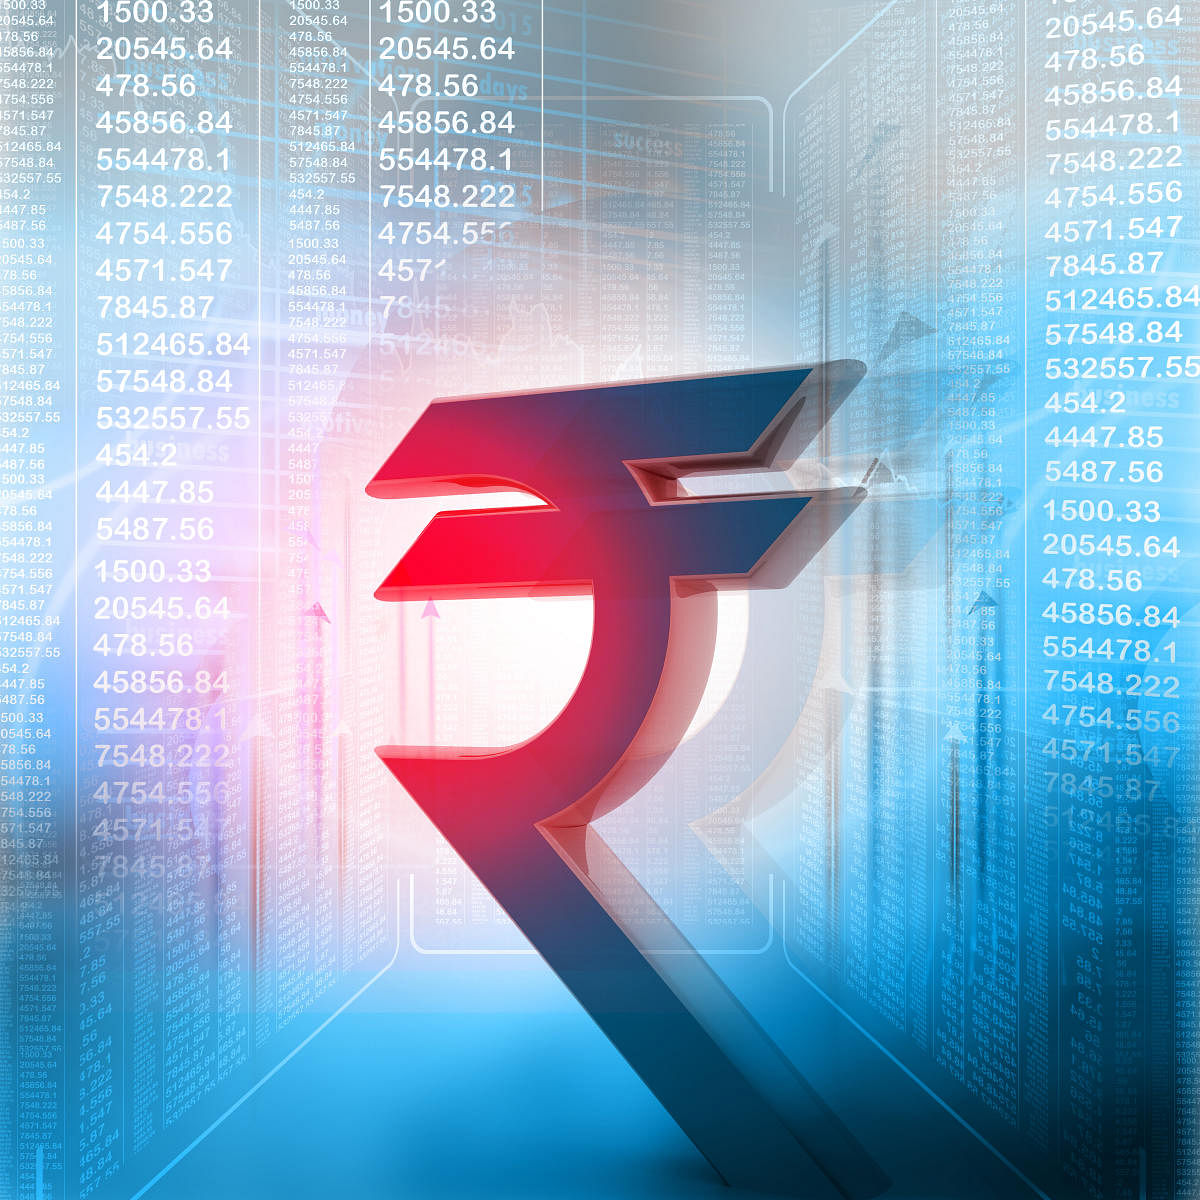 Indian rupee symbol in business background (Getty images)